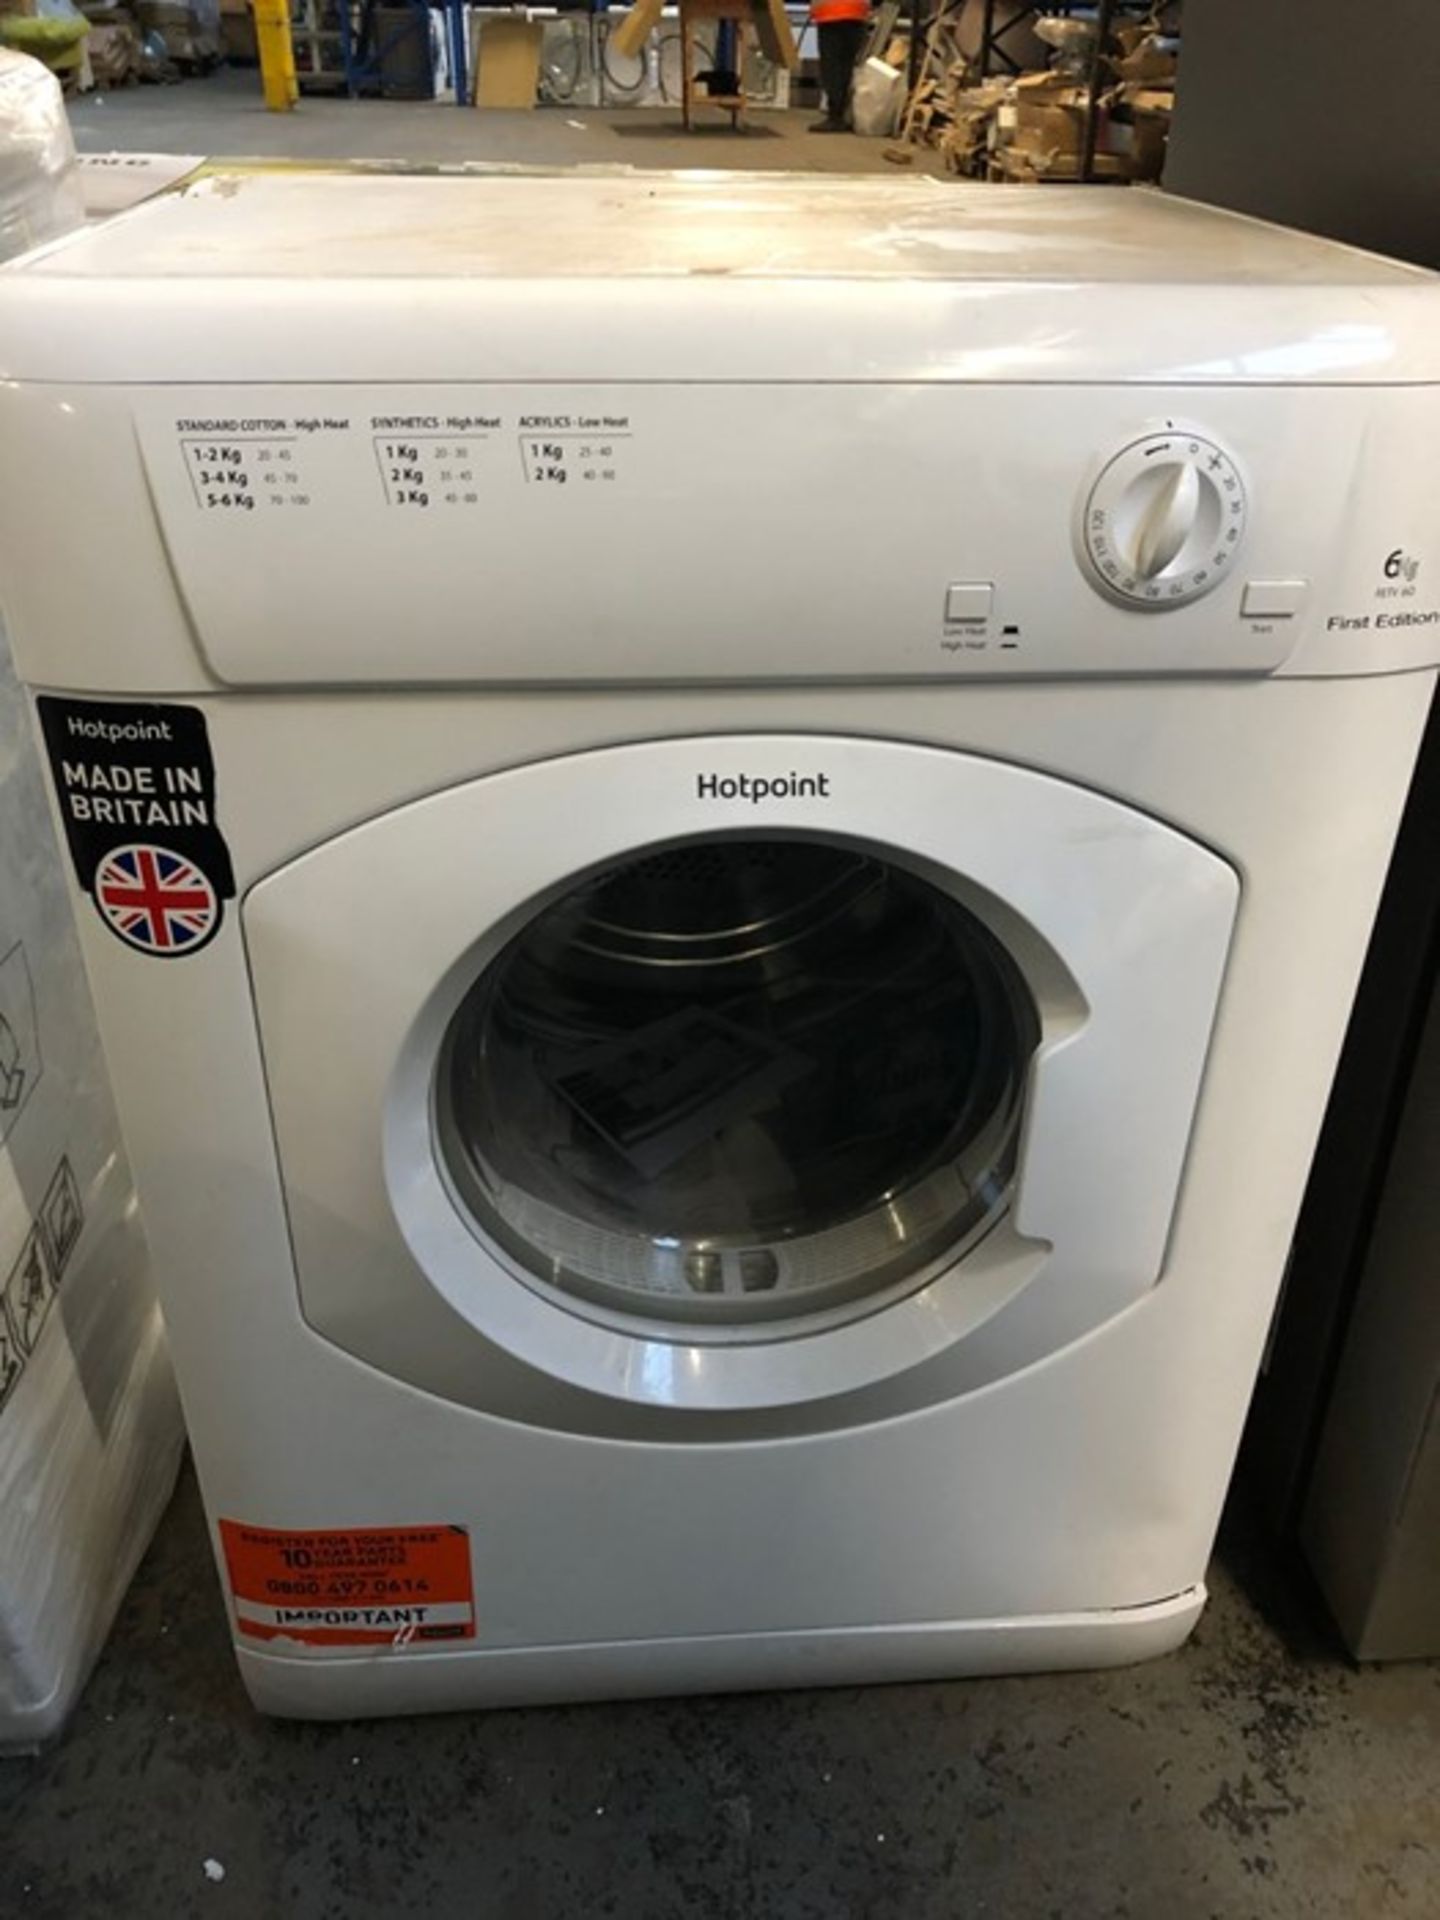 HOTPOINT VENTED TUMBLE DRYER - FETV60CP / RRP £209.99 / UNTESTED, UNUSED. COSMETIC DAMAGE, ONE